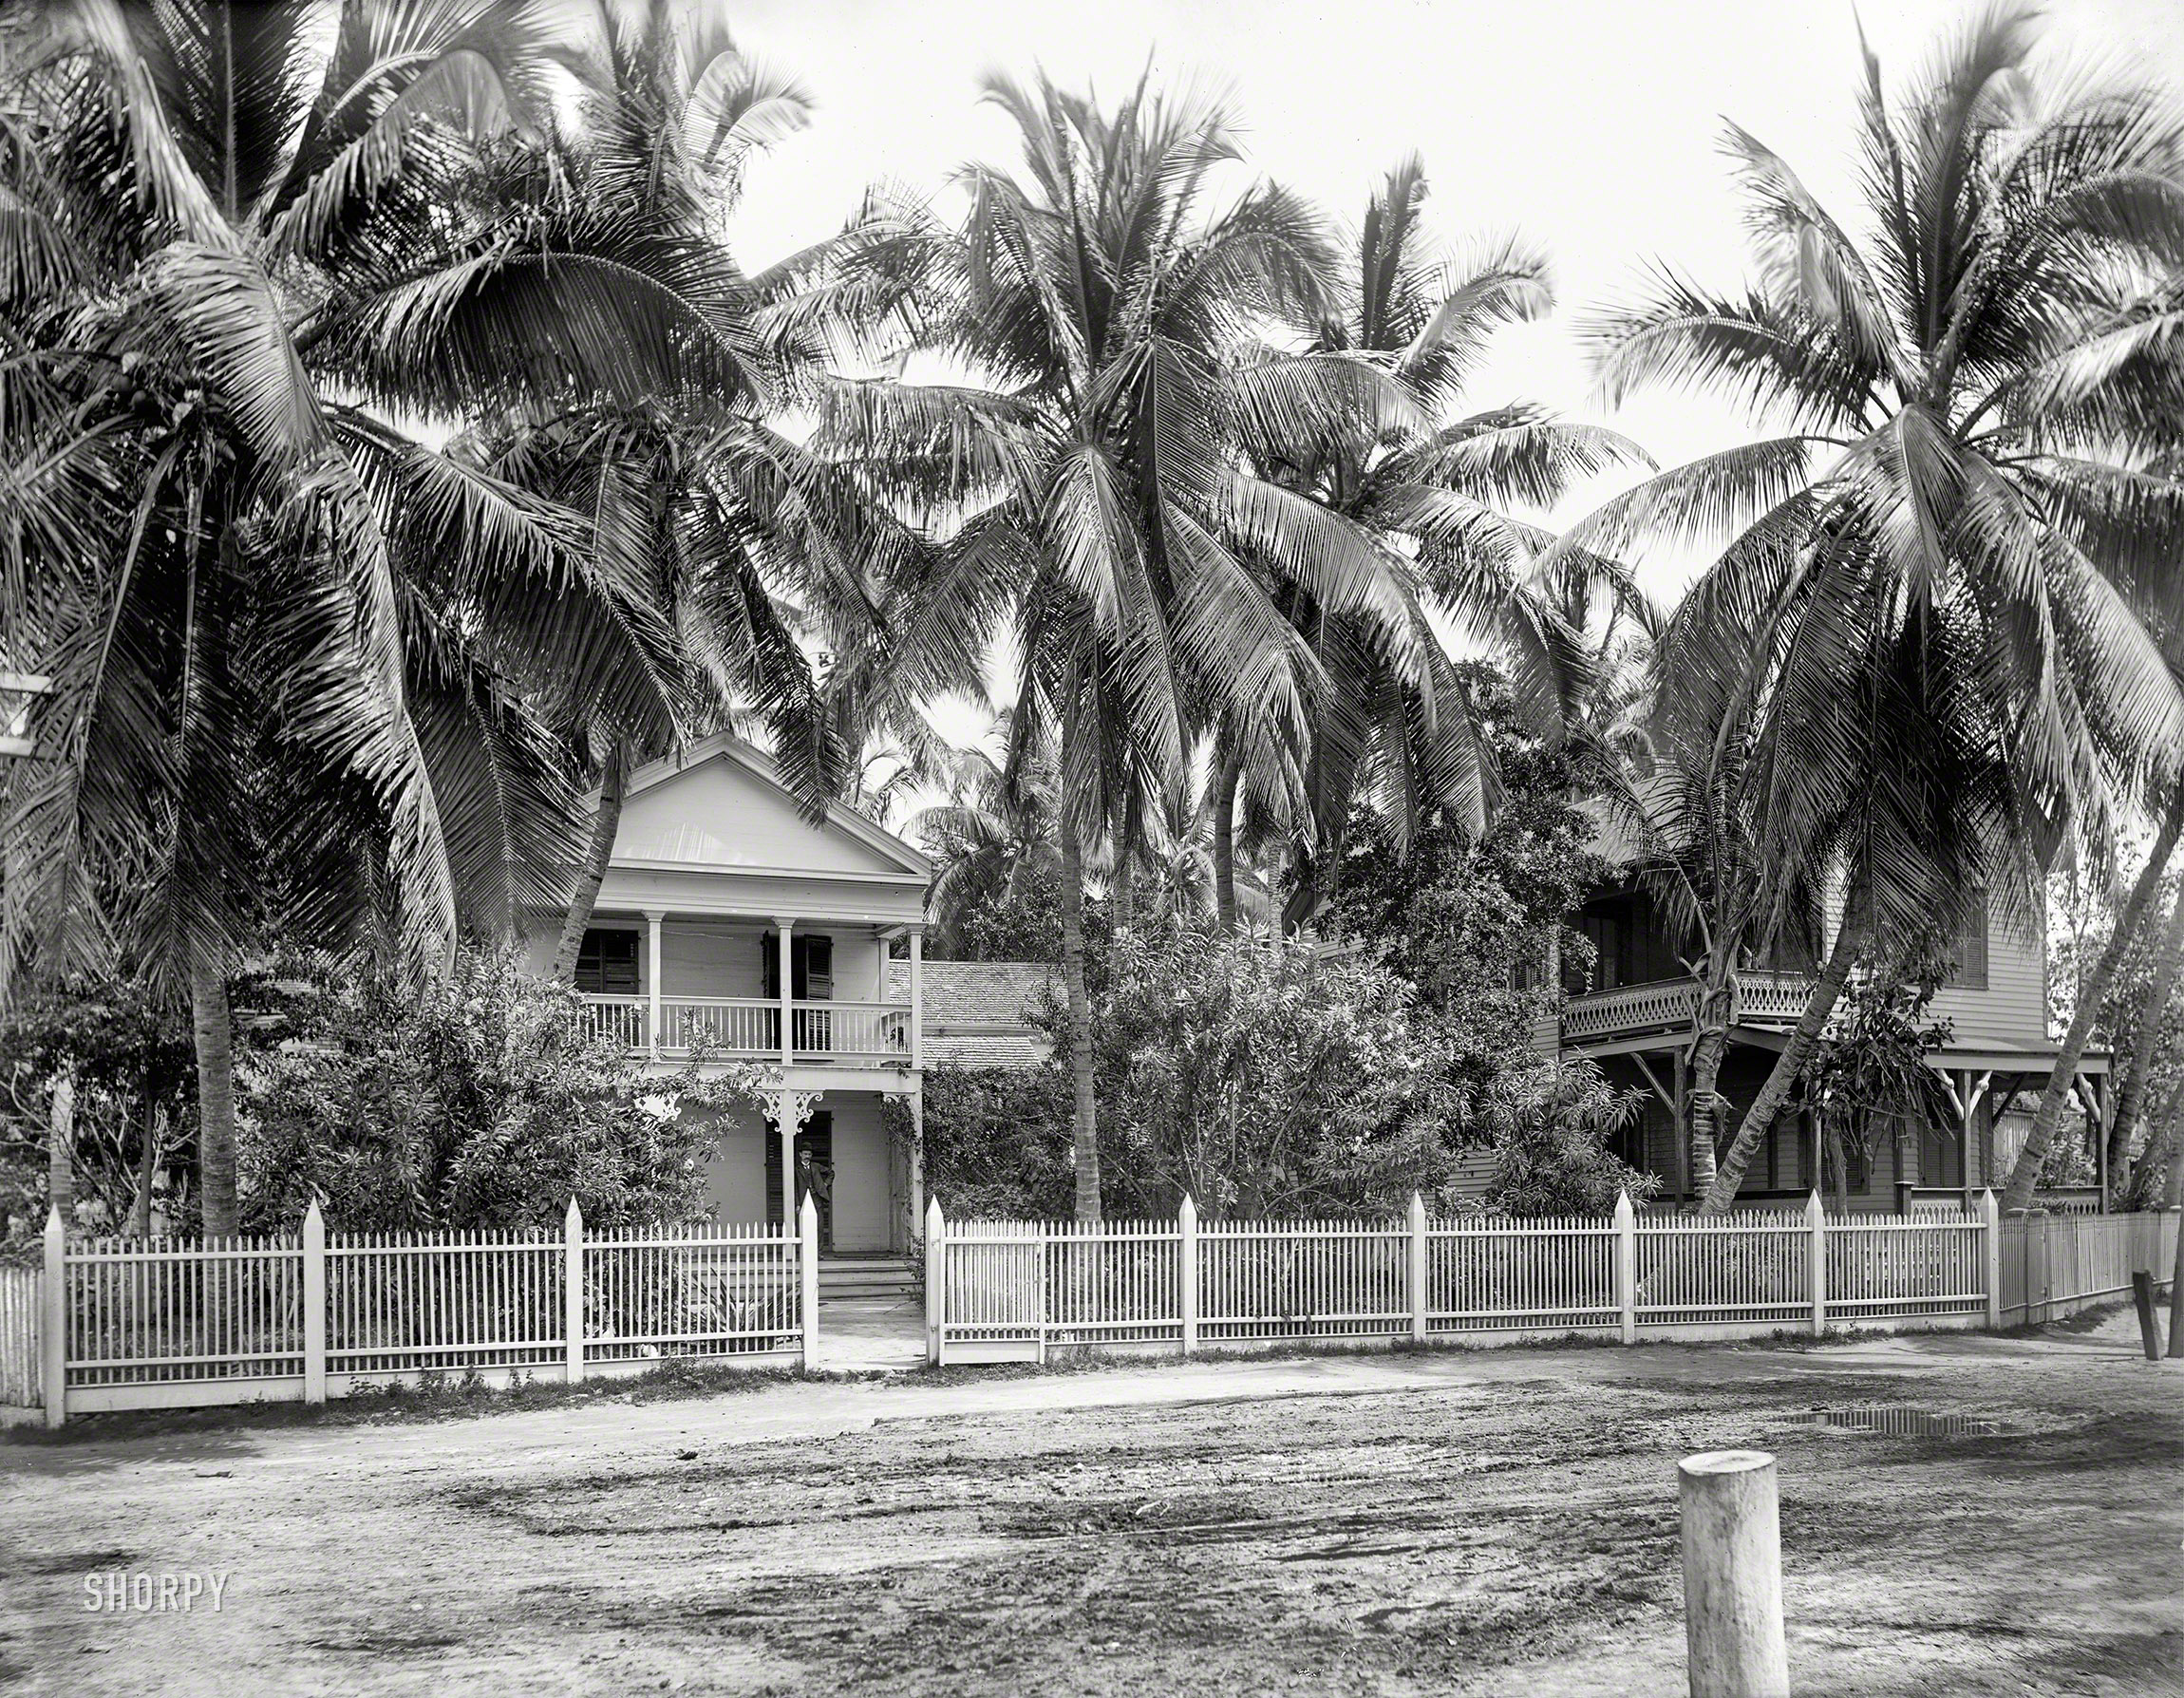 Key West, Florida, circa 1900. "Residence in palm grove." 8x10 inch dry plate glass negative, Detroit Photographic Company. View full size.